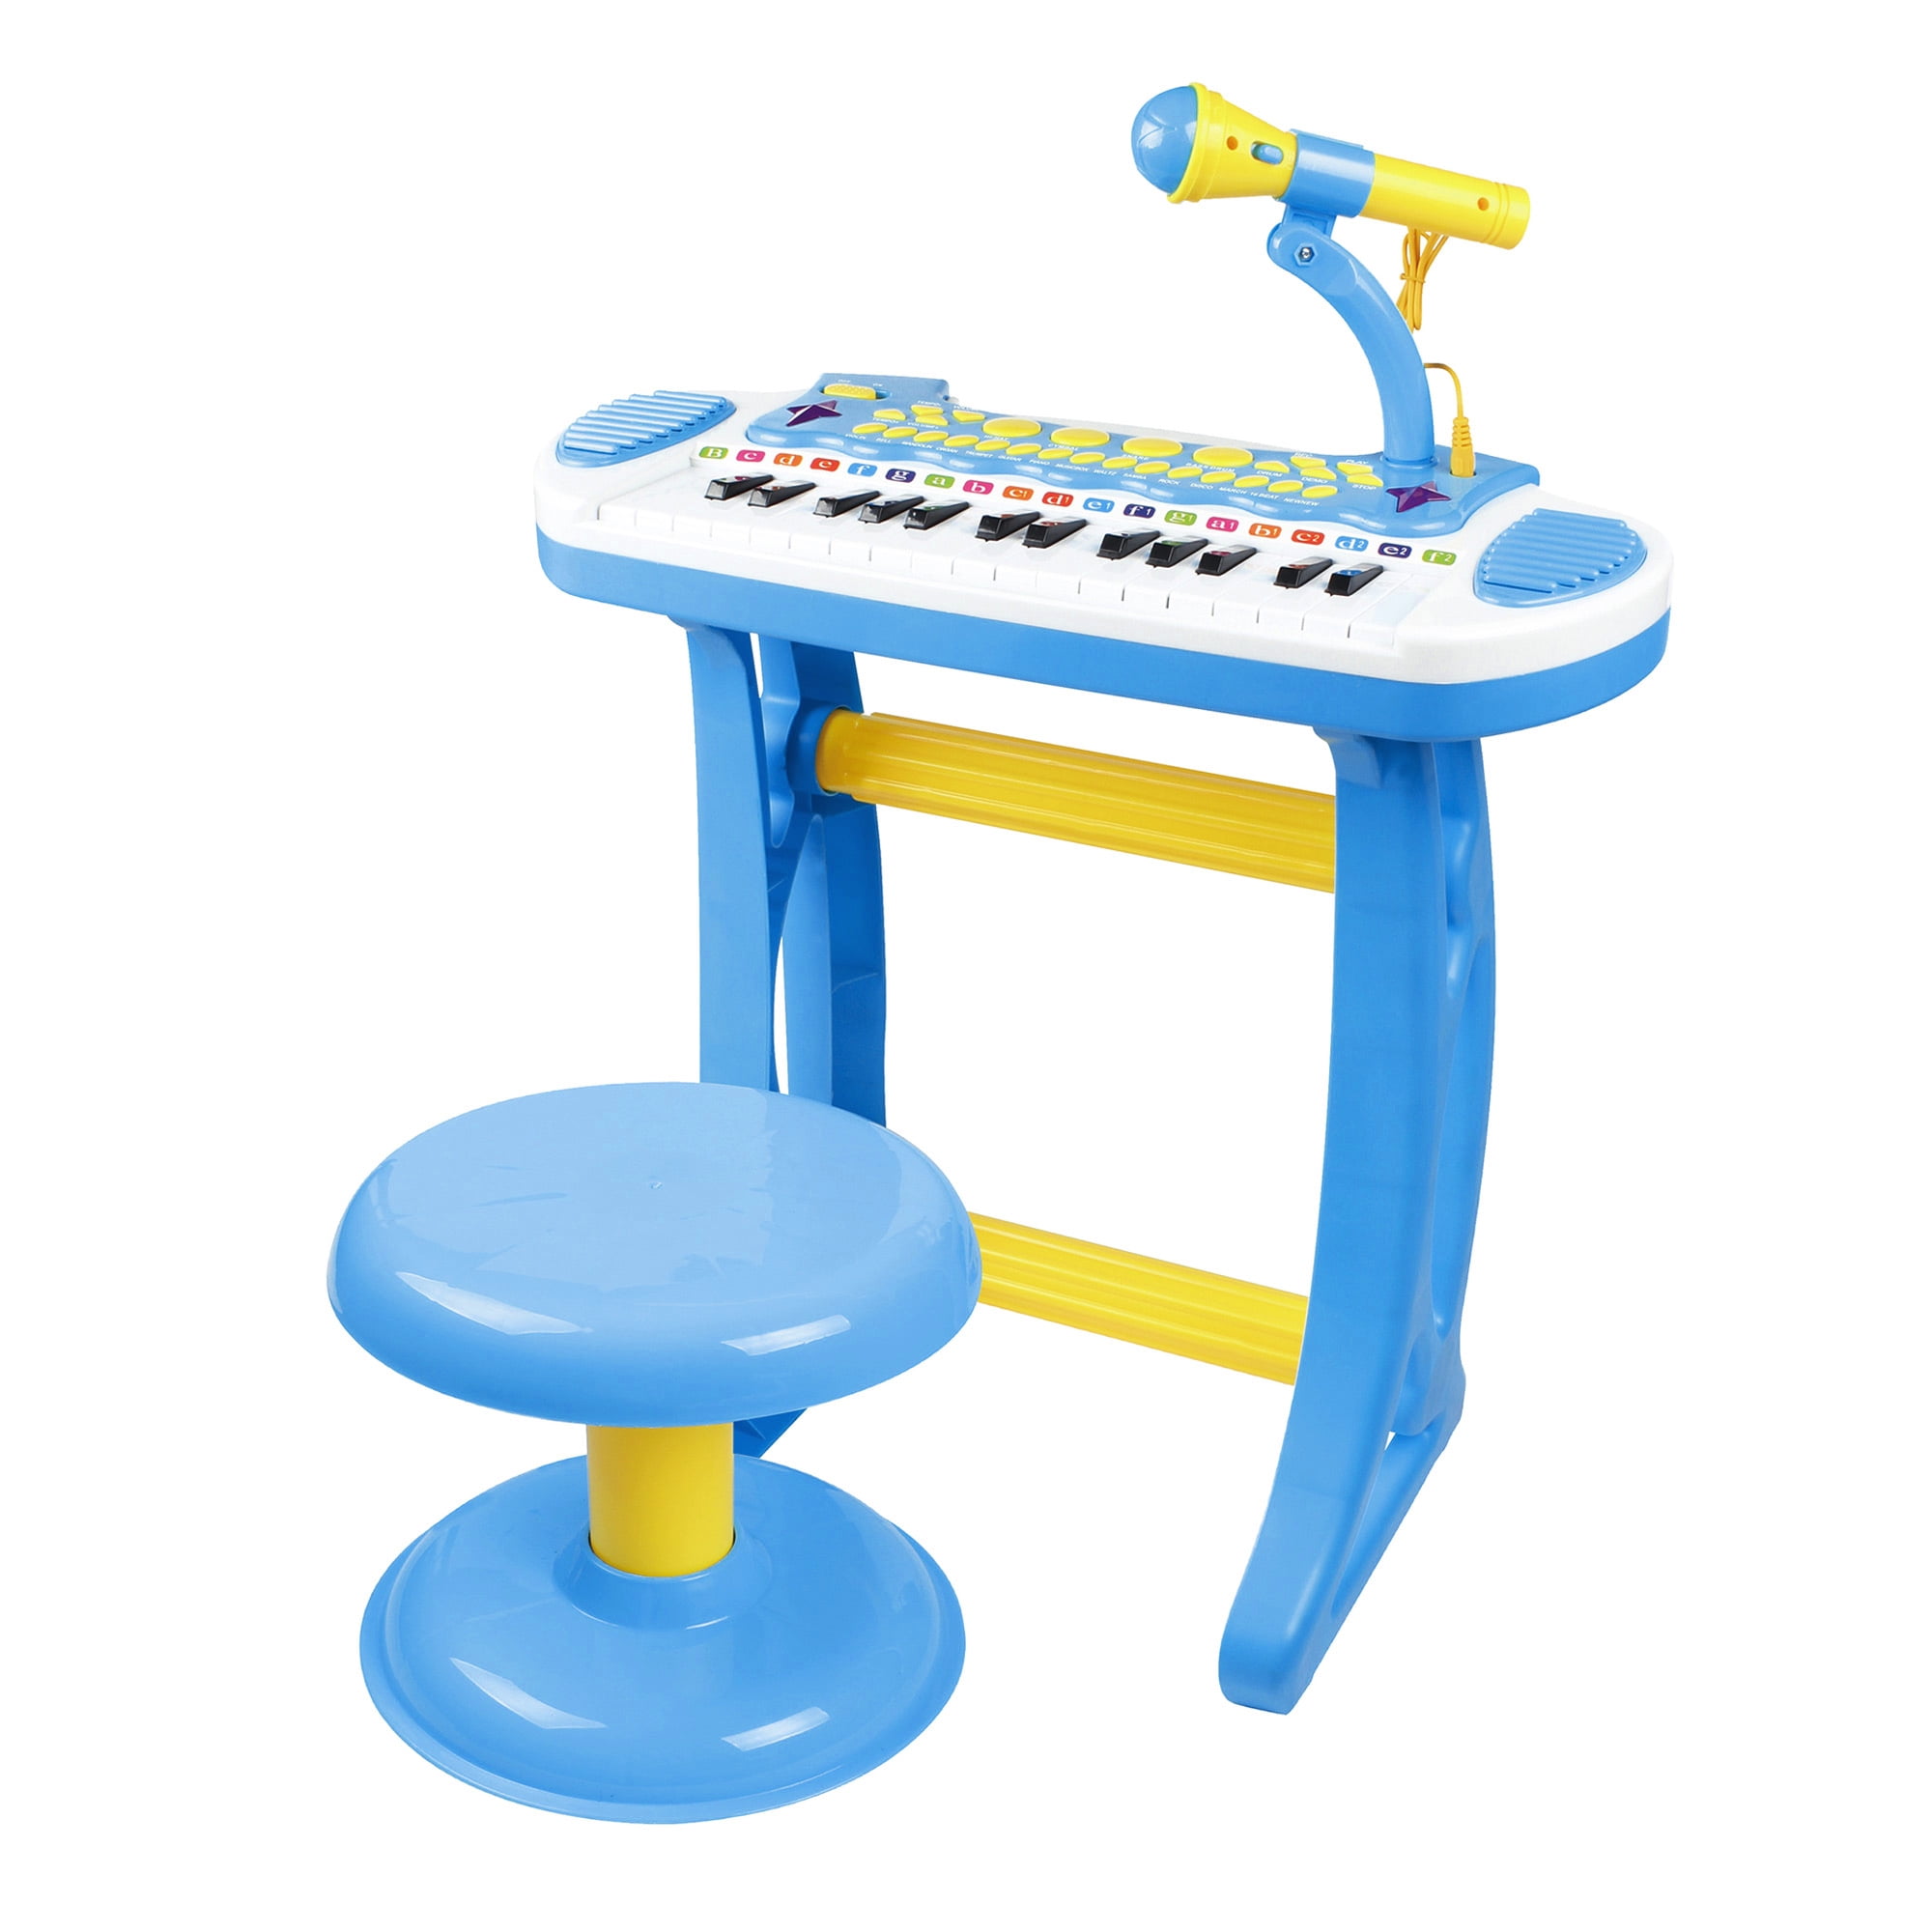 Kids Electronic Keyboard  6-IN-1 Piano Musical Toy w/ Microphone & Stool & drum 